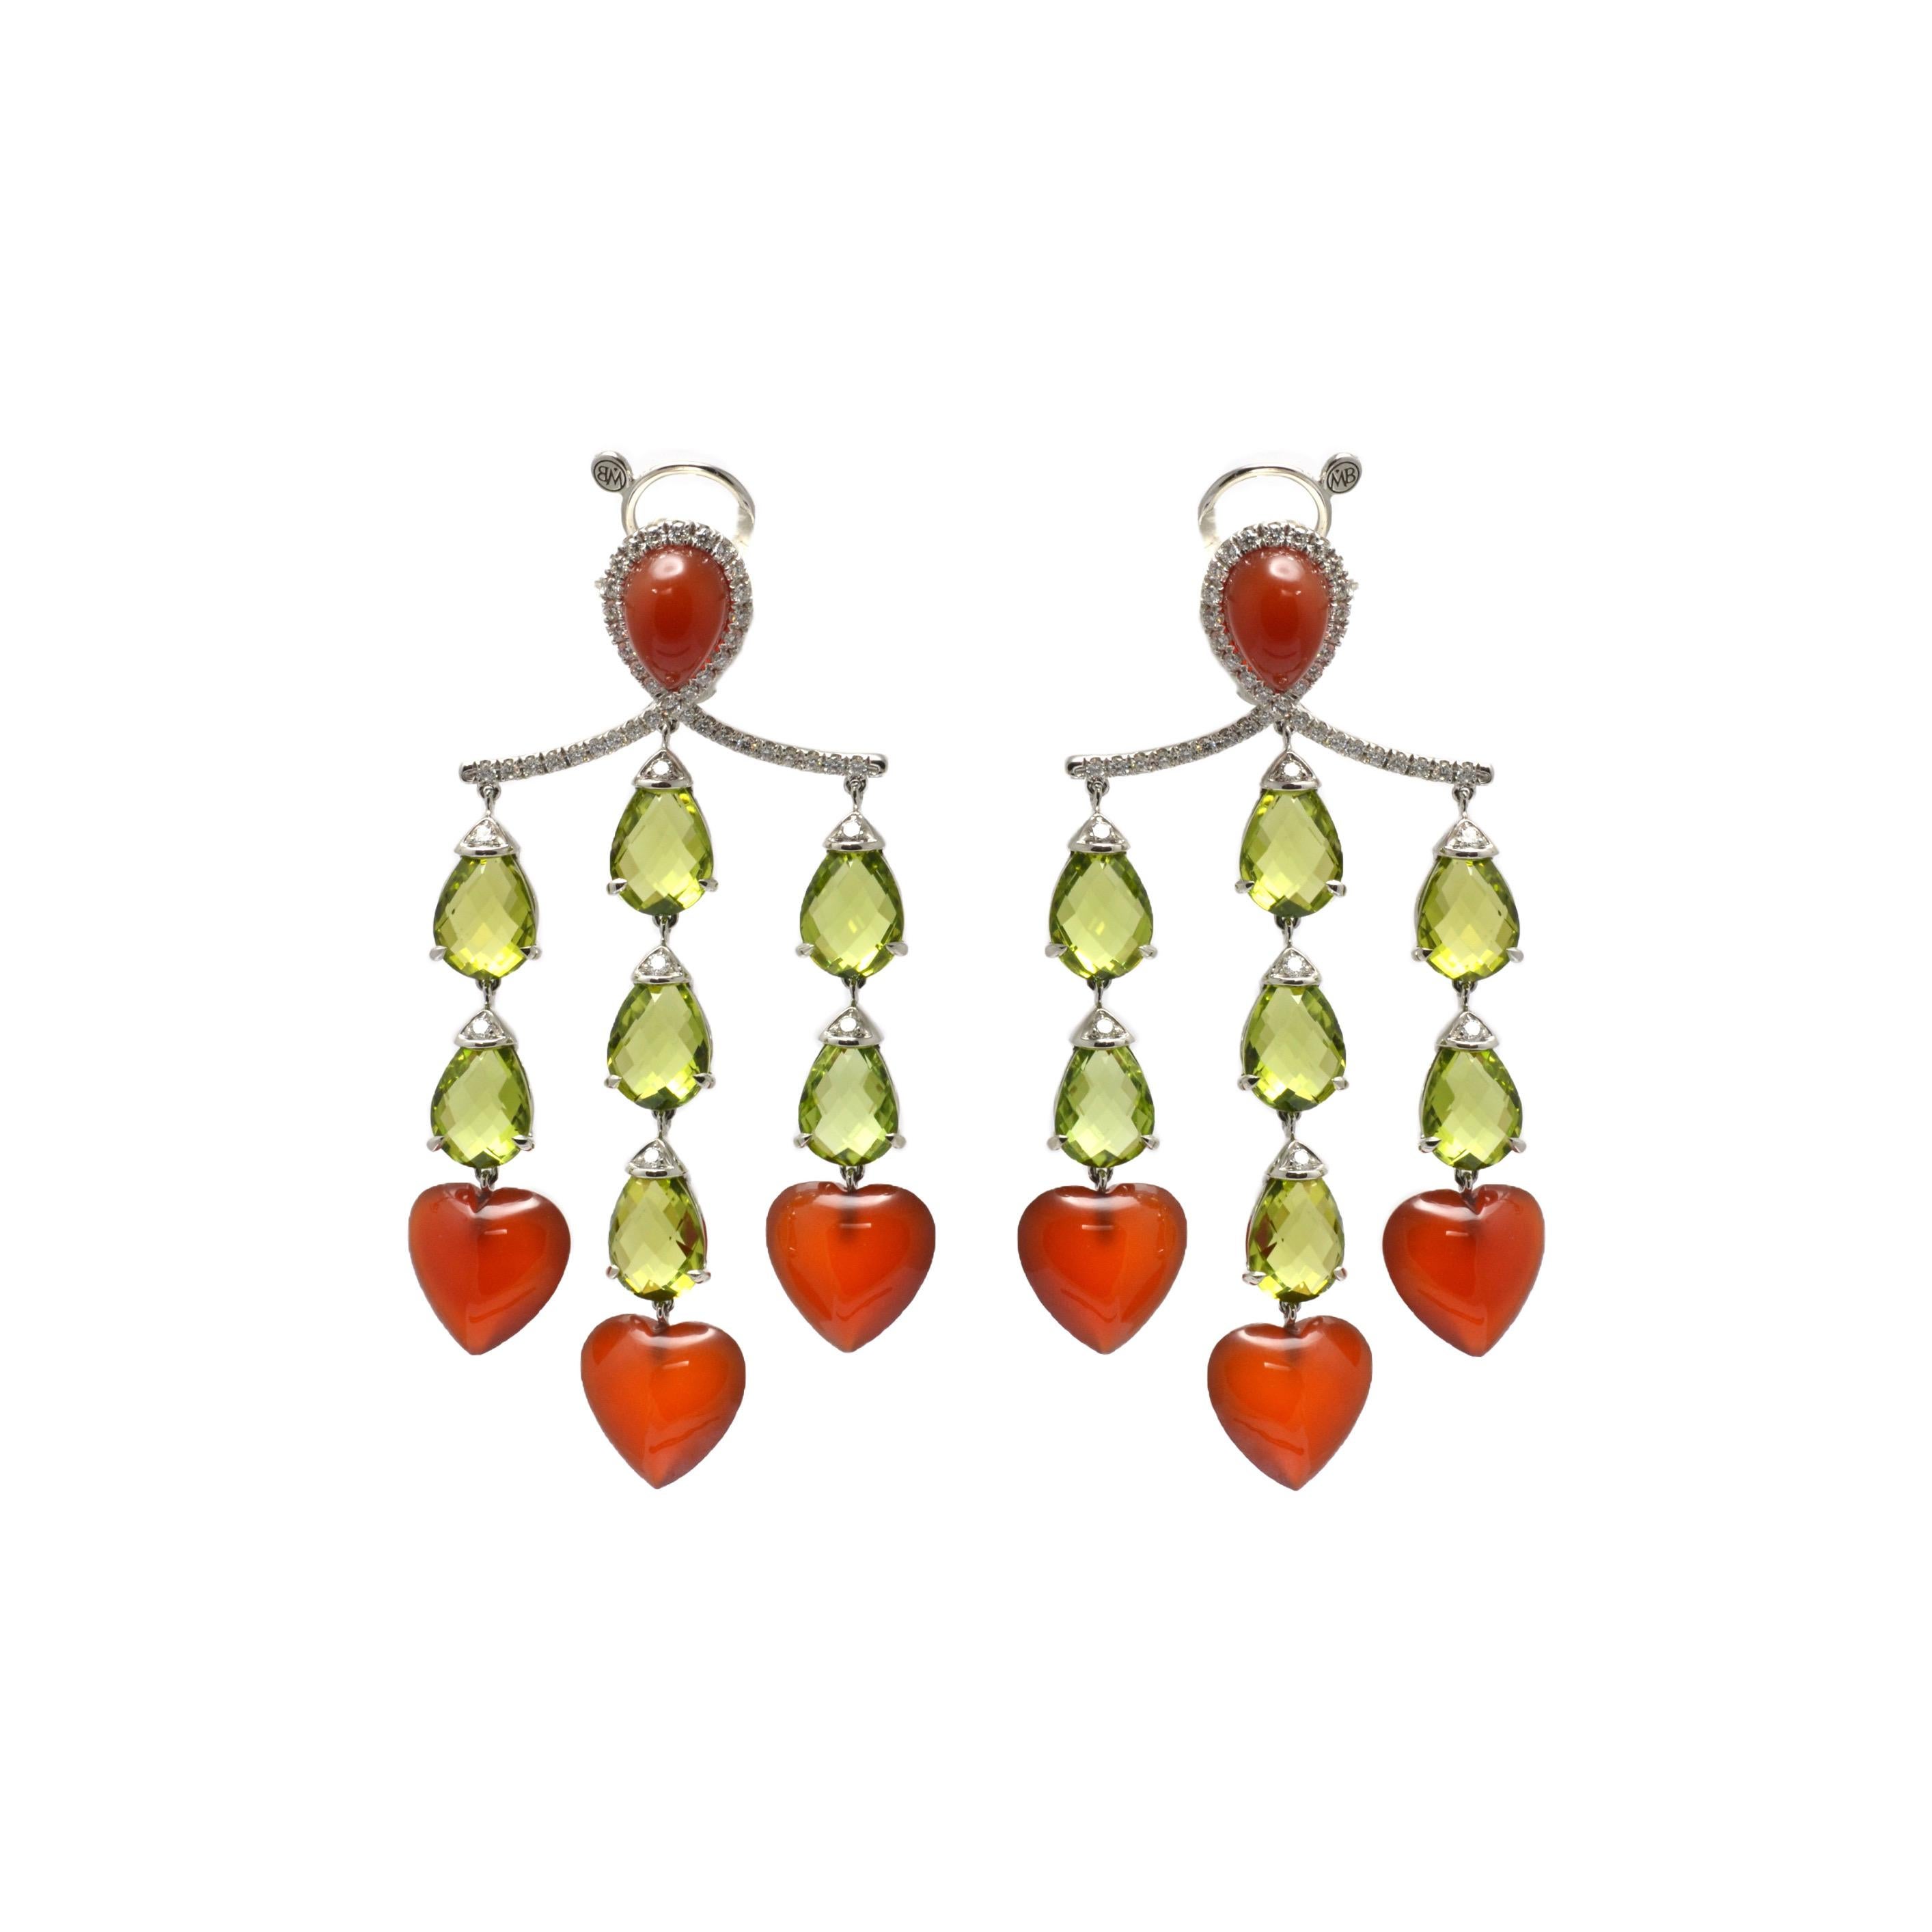 Handcrafted in Italy, in Margherita Burgener family workshop, the stunning  chandelier pendant earrings feature 14  beautiful peridots, briolette cut. On top of each drop there is a little diamond set in white gold.
3 carnelian heart shape cabochon